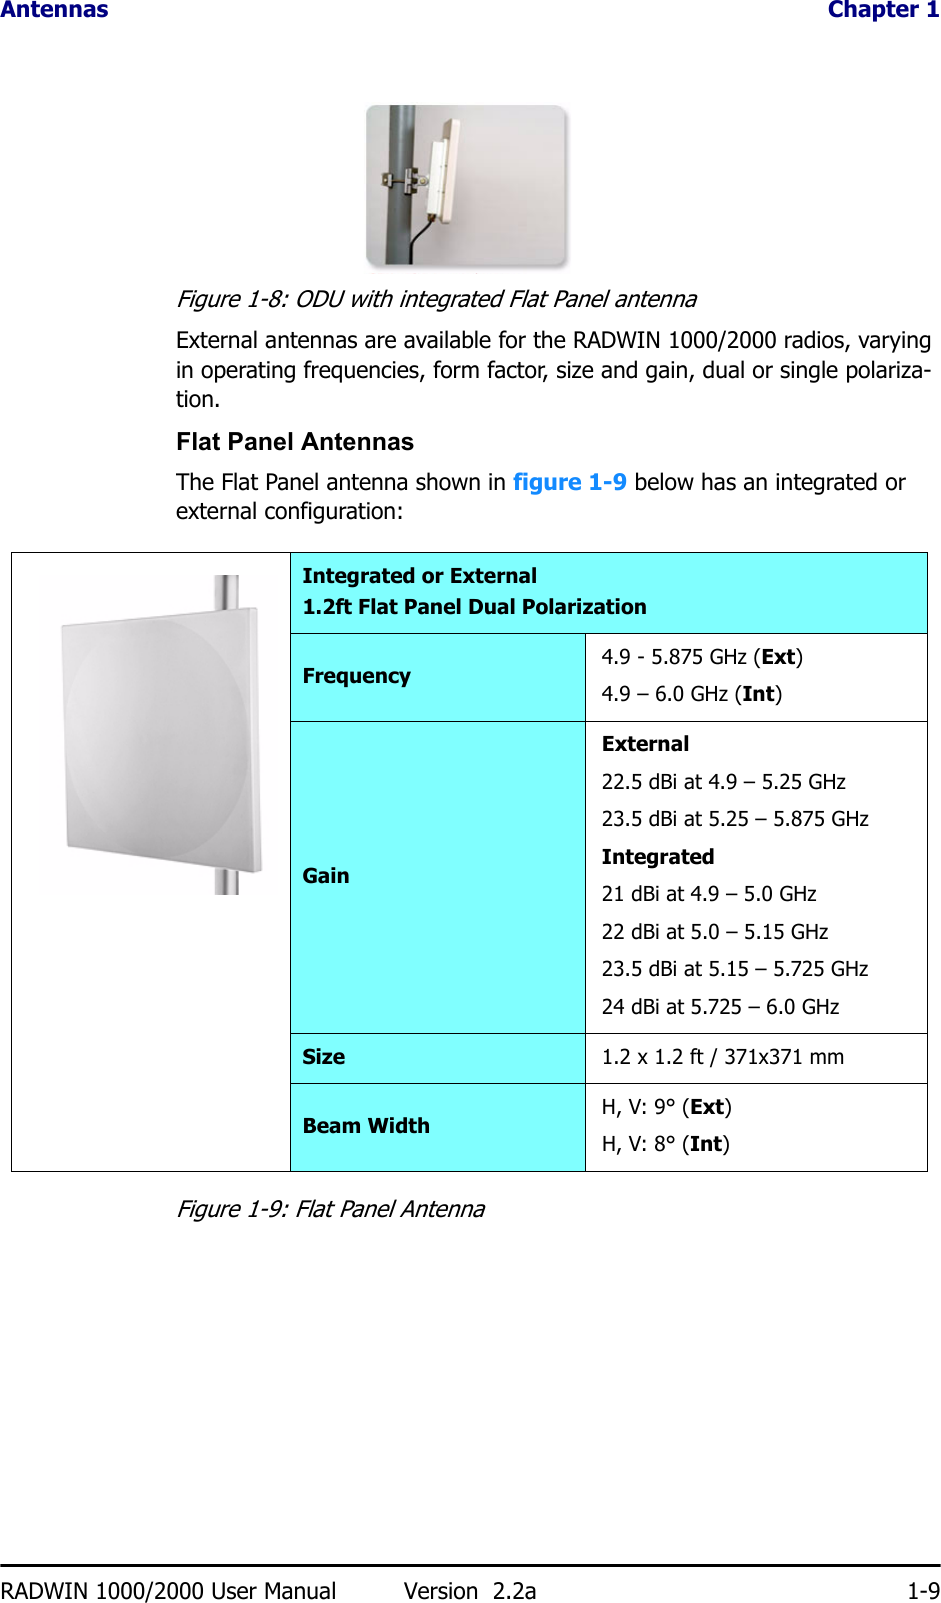 Antennas  Chapter 1RADWIN 1000/2000 User Manual Version  2.2a 1-9Figure 1-8: ODU with integrated Flat Panel antennaExternal antennas are available for the RADWIN 1000/2000 radios, varying in operating frequencies, form factor, size and gain, dual or single polariza-tion.Flat Panel AntennasThe Flat Panel antenna shown in figure 1-9 below has an integrated or external configuration:Figure 1-9: Flat Panel AntennaIntegrated or External1.2ft Flat Panel Dual PolarizationFrequency 4.9 - 5.875 GHz (Ext)4.9 – 6.0 GHz (Int)GainExternal22.5 dBi at 4.9 – 5.25 GHz 23.5 dBi at 5.25 – 5.875 GHz Integrated21 dBi at 4.9 – 5.0 GHz 22 dBi at 5.0 – 5.15 GHz 23.5 dBi at 5.15 – 5.725 GHz24 dBi at 5.725 – 6.0 GHzSize 1.2 x 1.2 ft / 371x371 mmBeam Width H, V: 9° (Ext)H, V: 8° (Int)